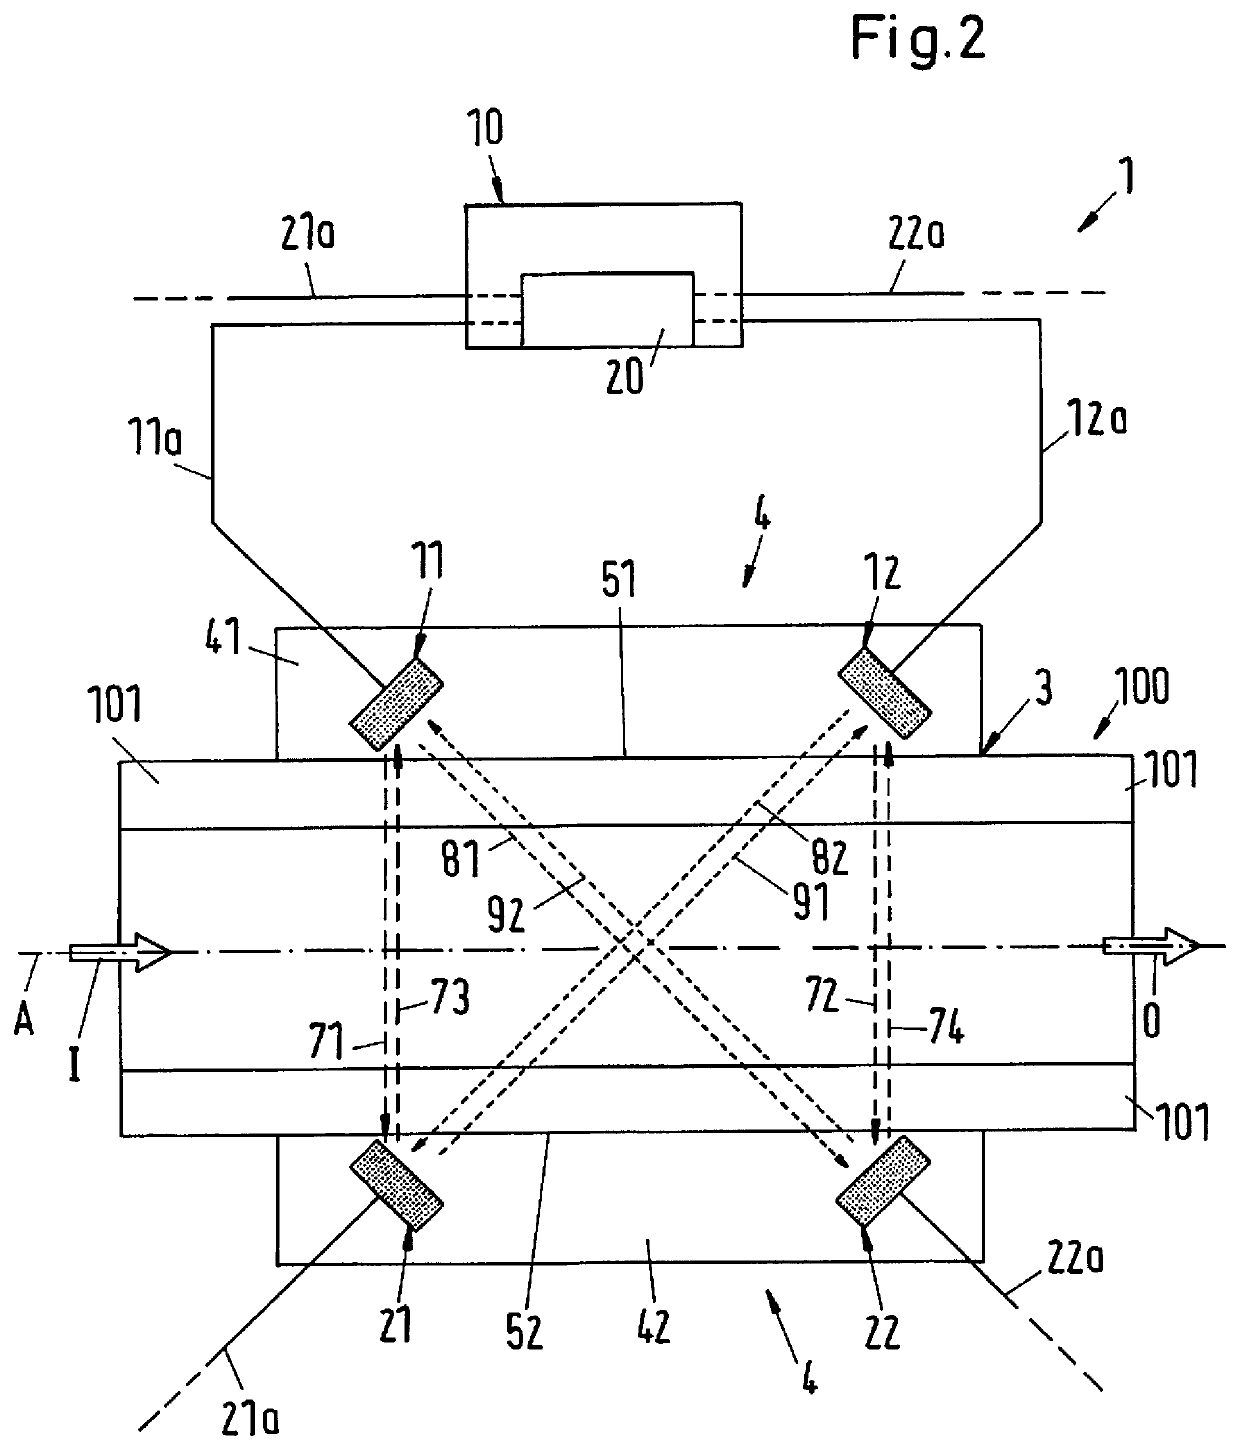 Ultrasonic measuring device having transducers housed in a clamping device